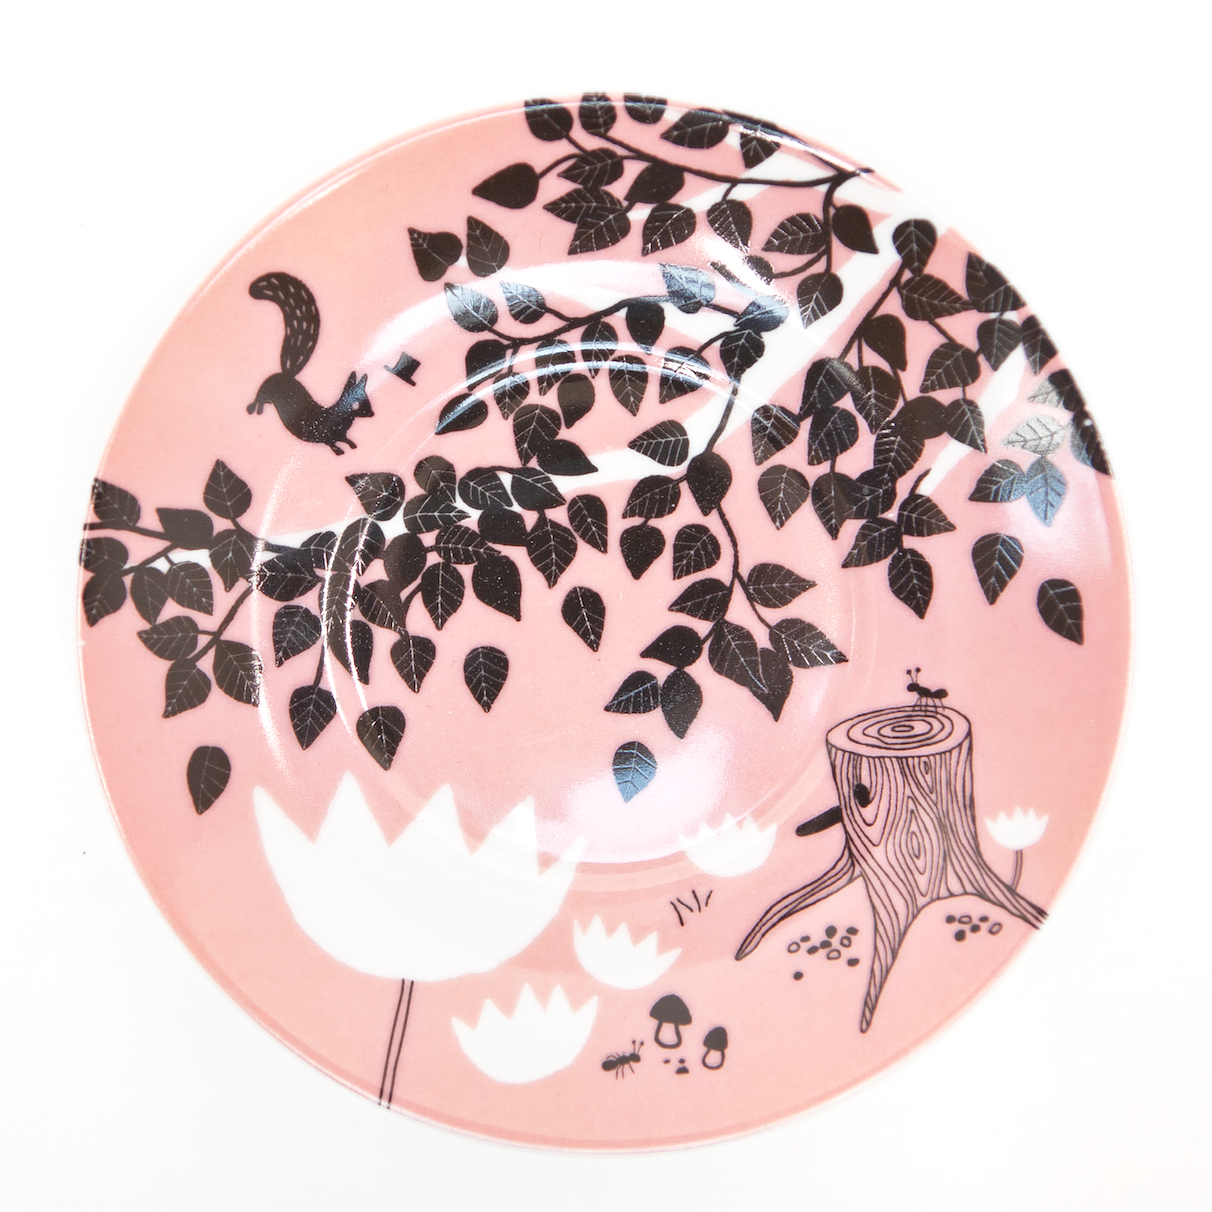 Hats off for Mr Squirrel Cake Plate - Northlight Homestore